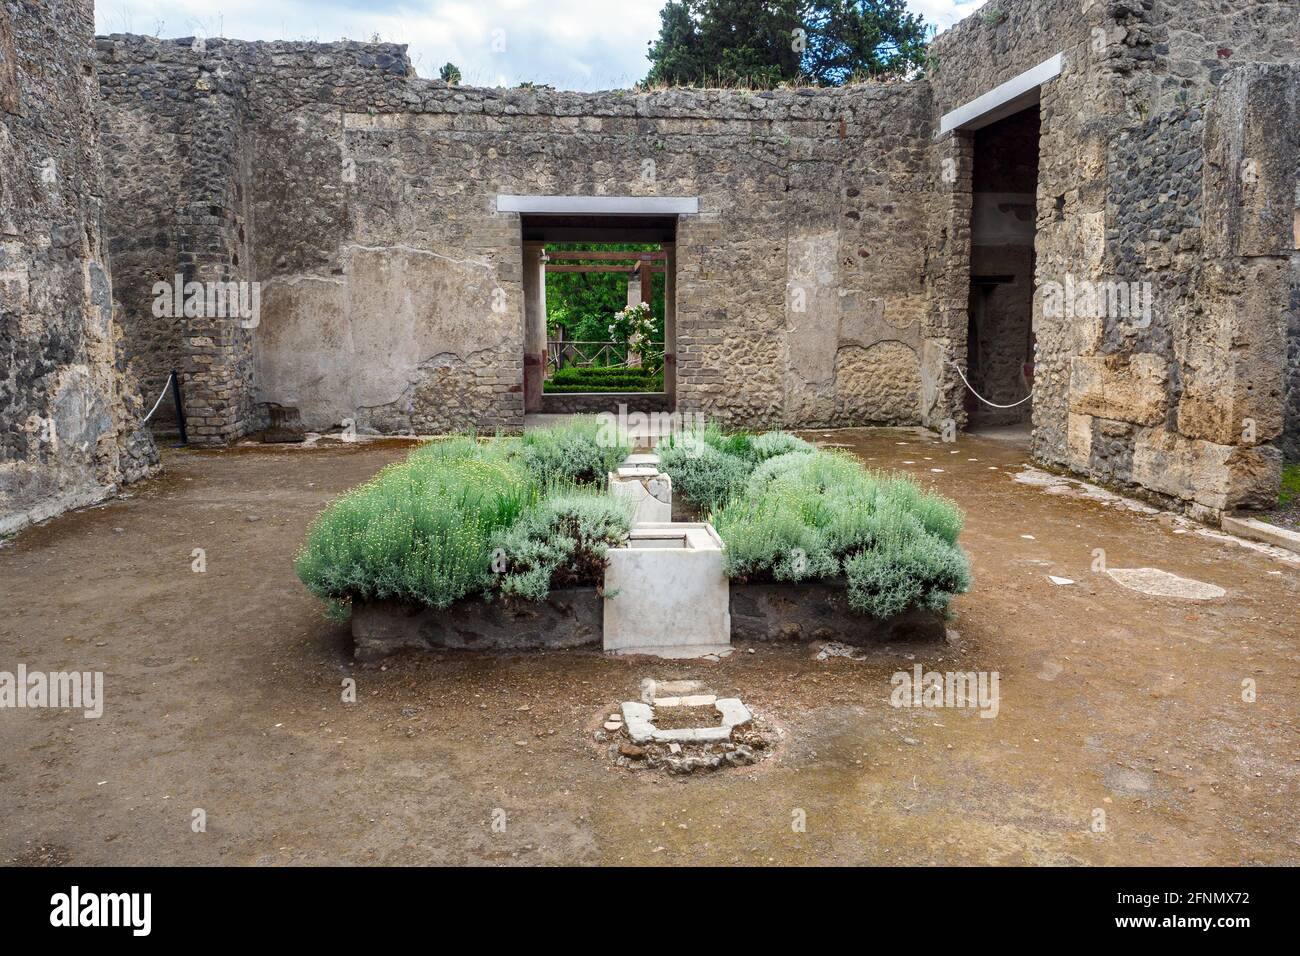 Rectangular atrium with a central impluvium surrounded by a border for plants in the House of Octavius Quartio - Pompeii archaeological site, Italy Stock Photo